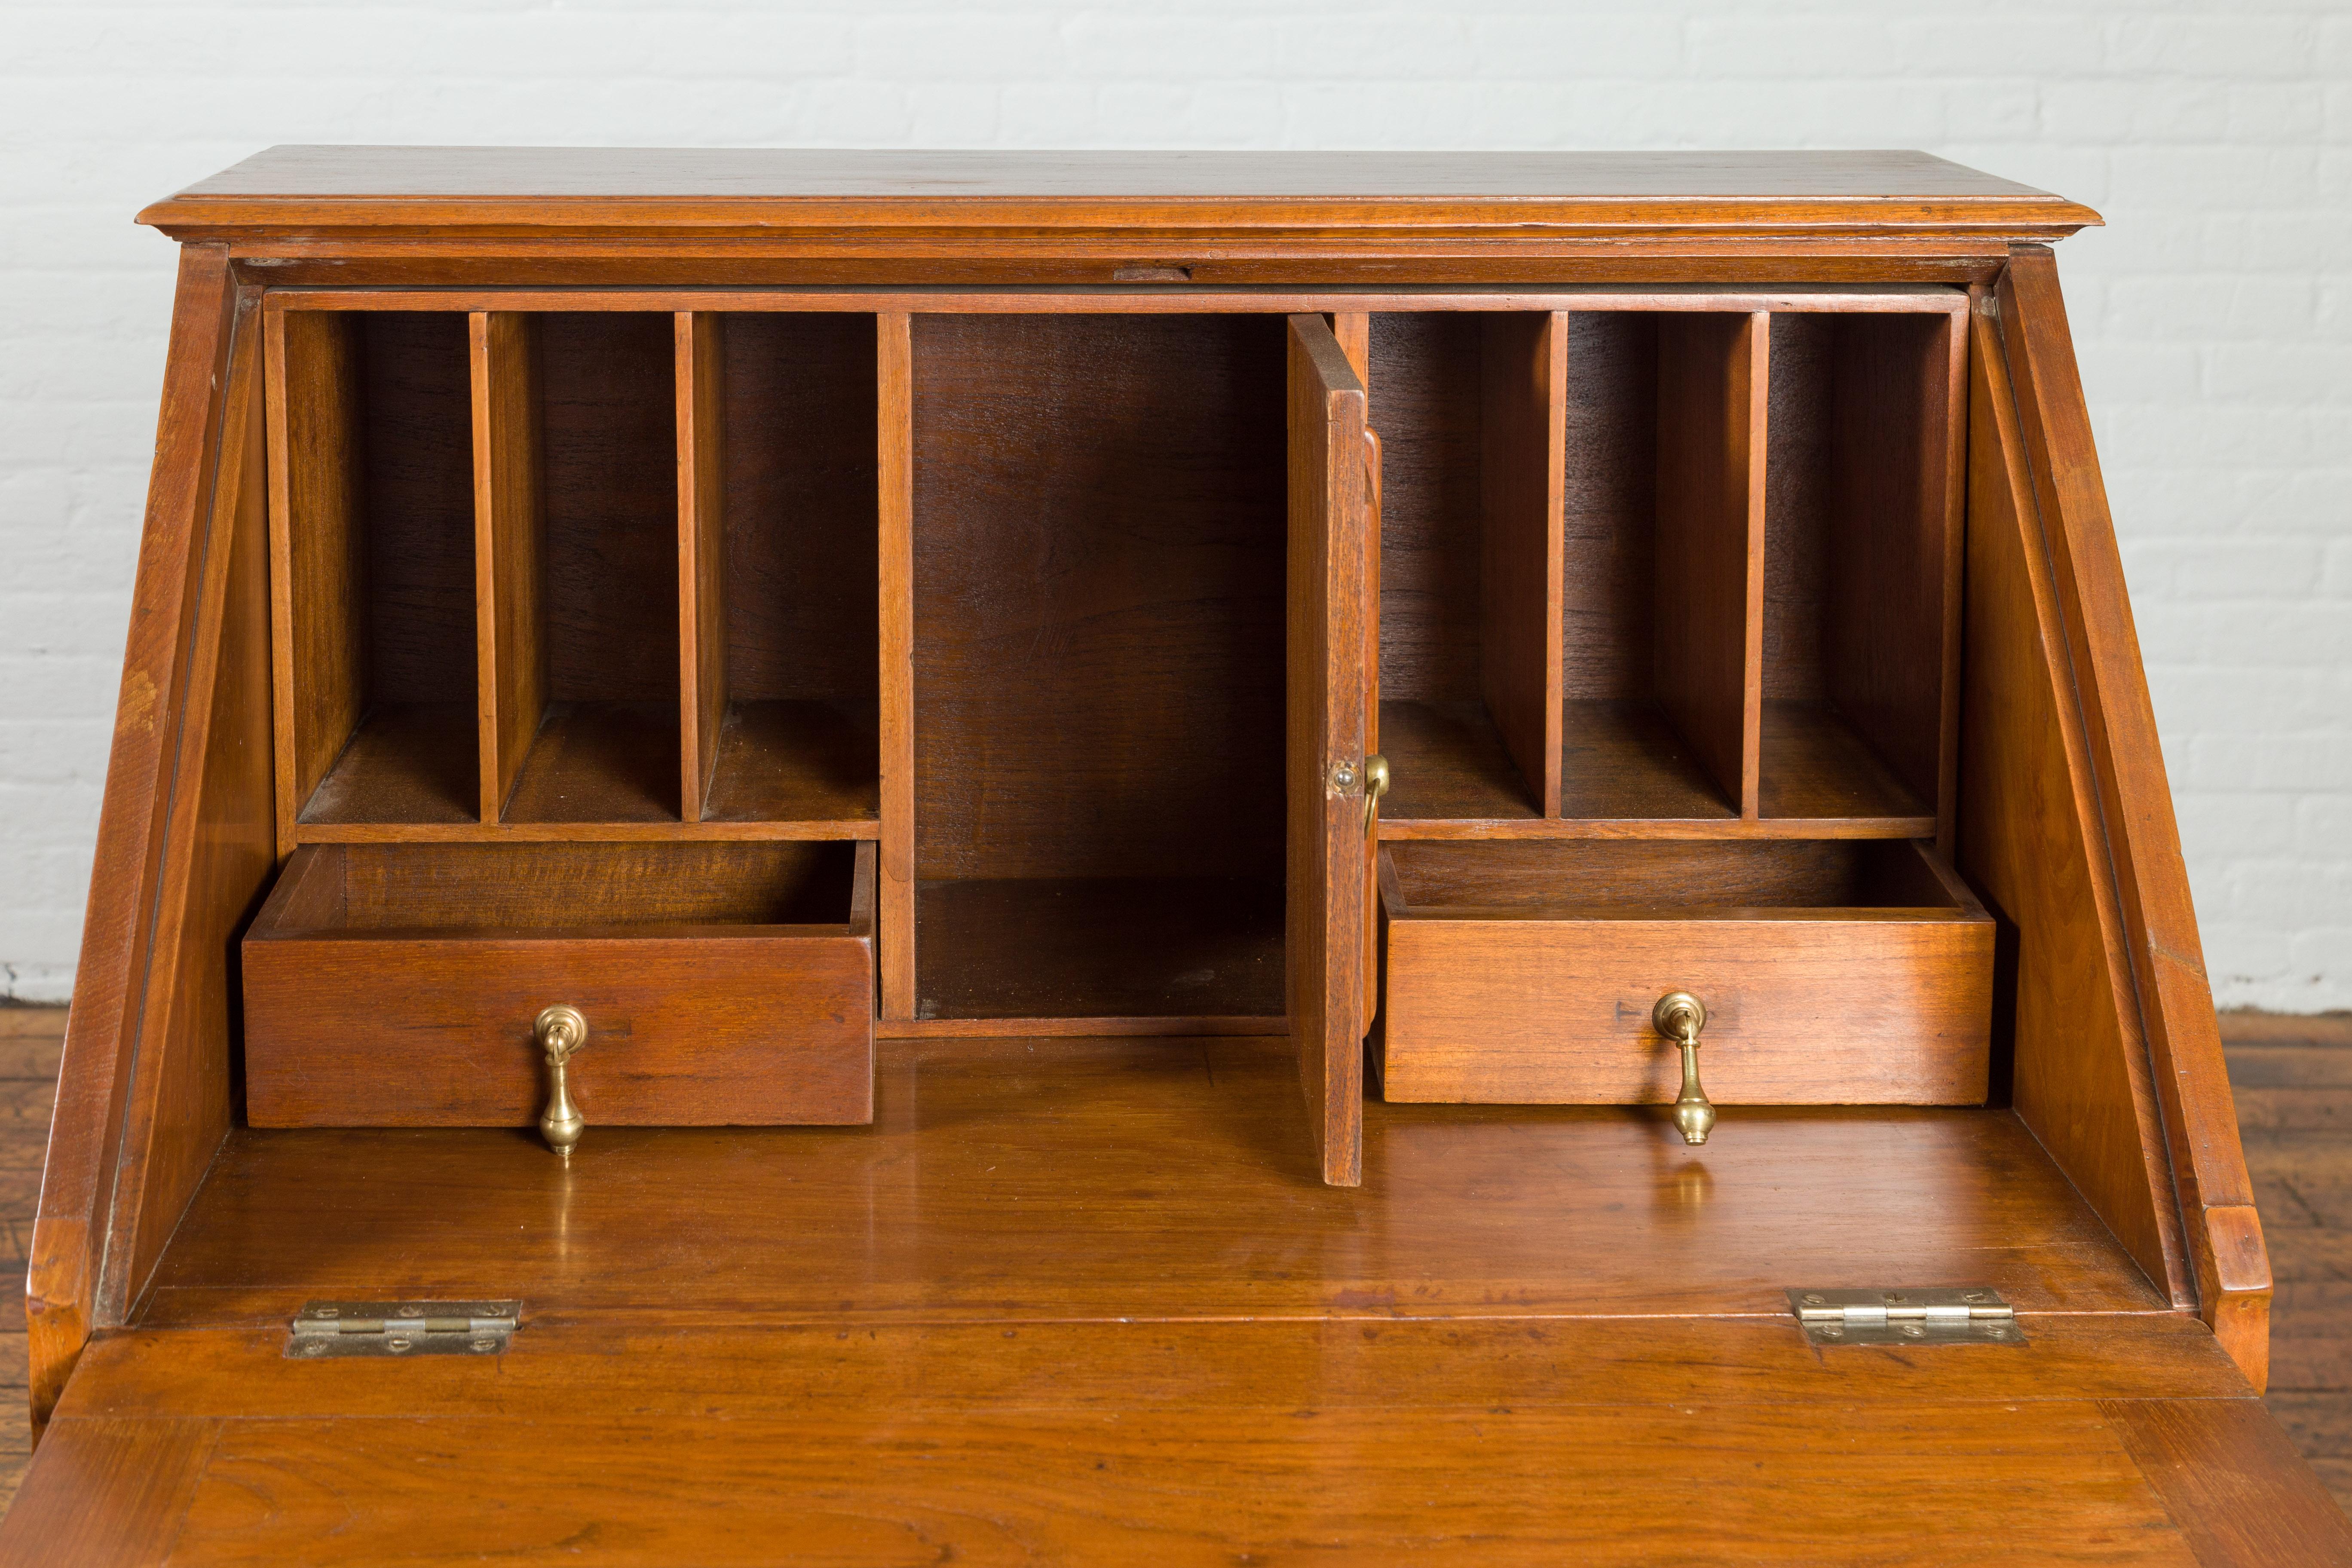 Indonesian 19th Century Handmade Slant-Front Desk with Raised Panels and Drawers For Sale 2